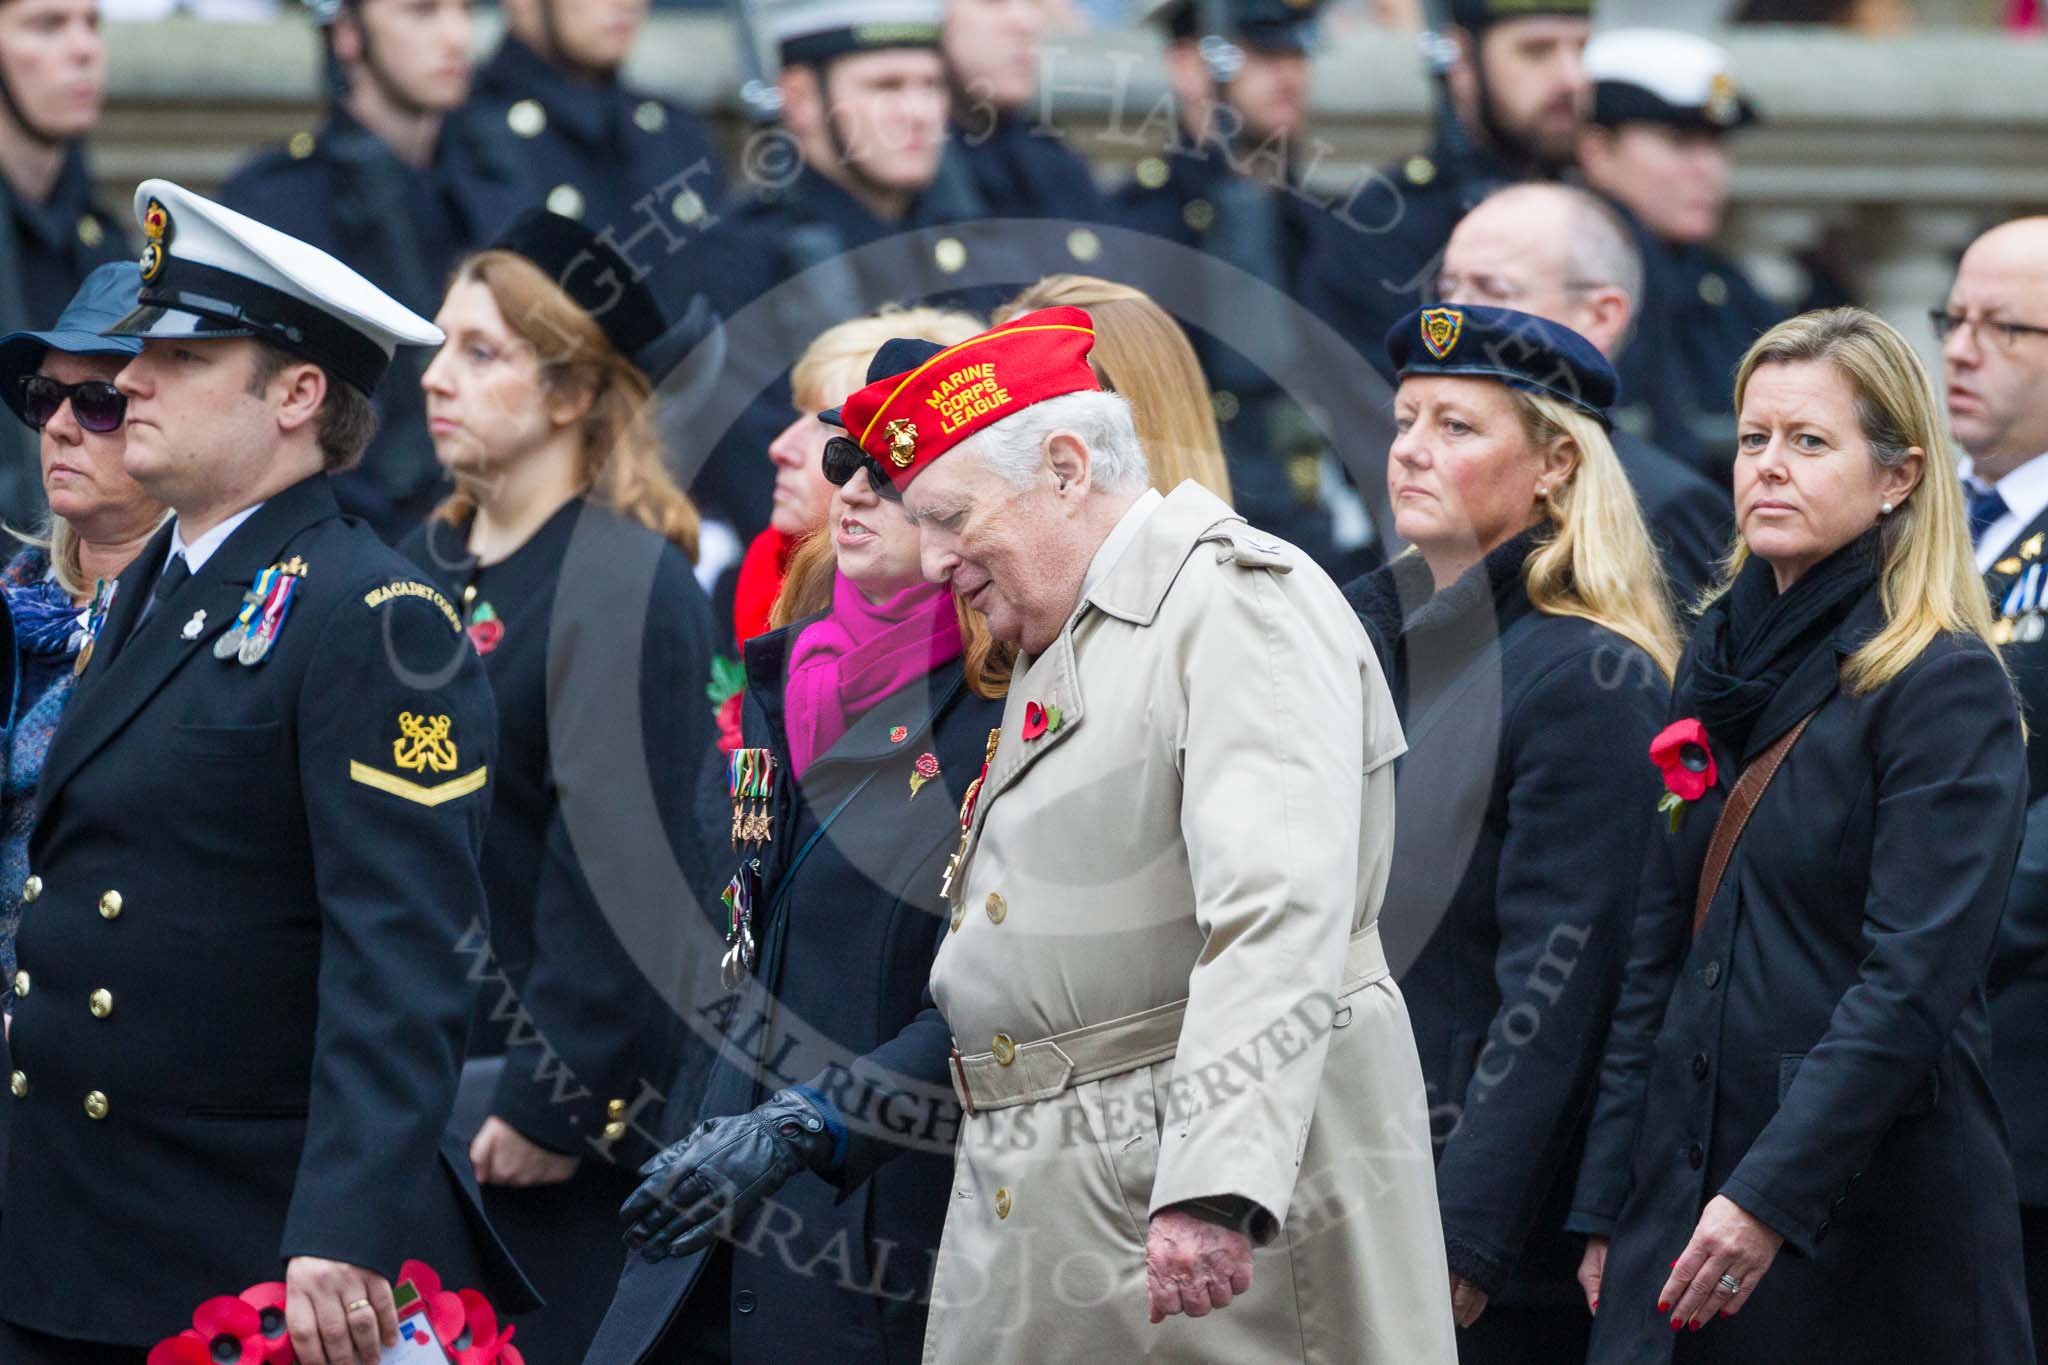 Remembrance Sunday at the Cenotaph 2015: Group E3, Merchant Navy Association.
Cenotaph, Whitehall, London SW1,
London,
Greater London,
United Kingdom,
on 08 November 2015 at 11:59, image #832